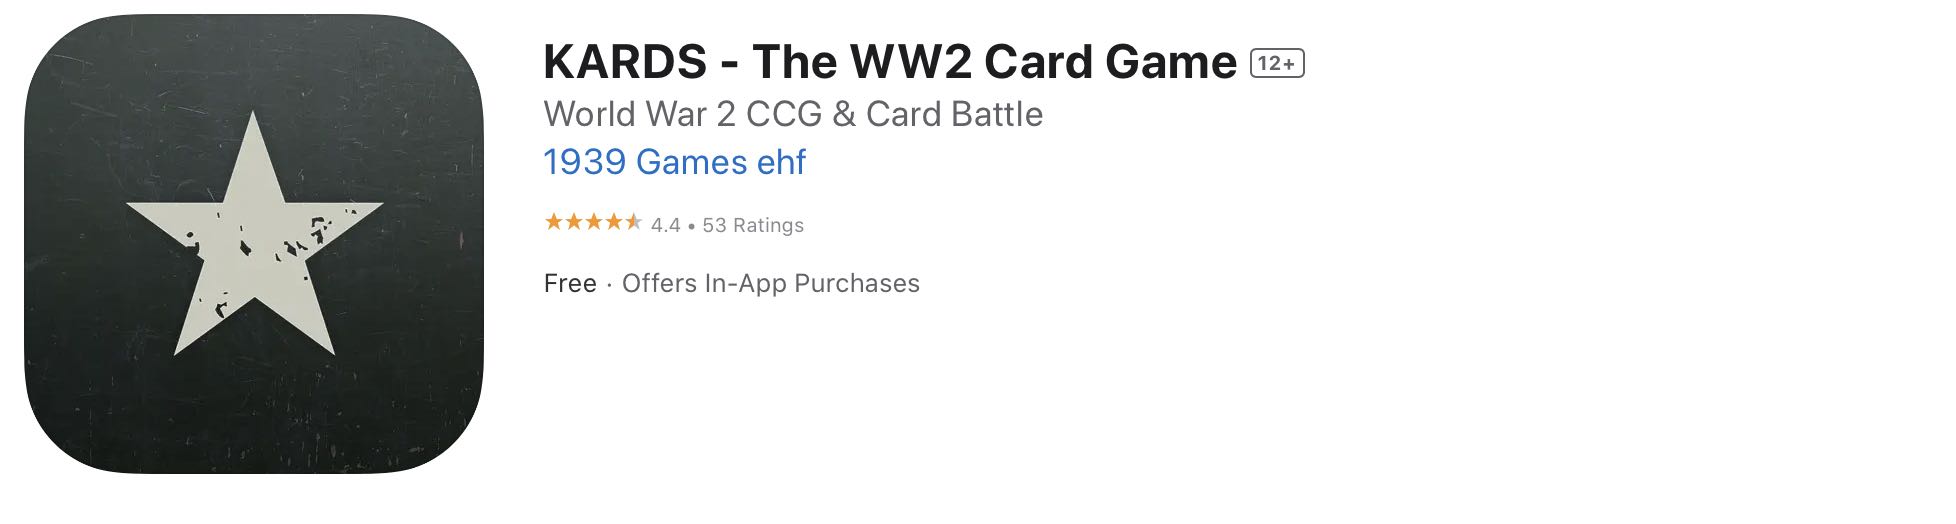 KARDS - The WW2 cheat codes